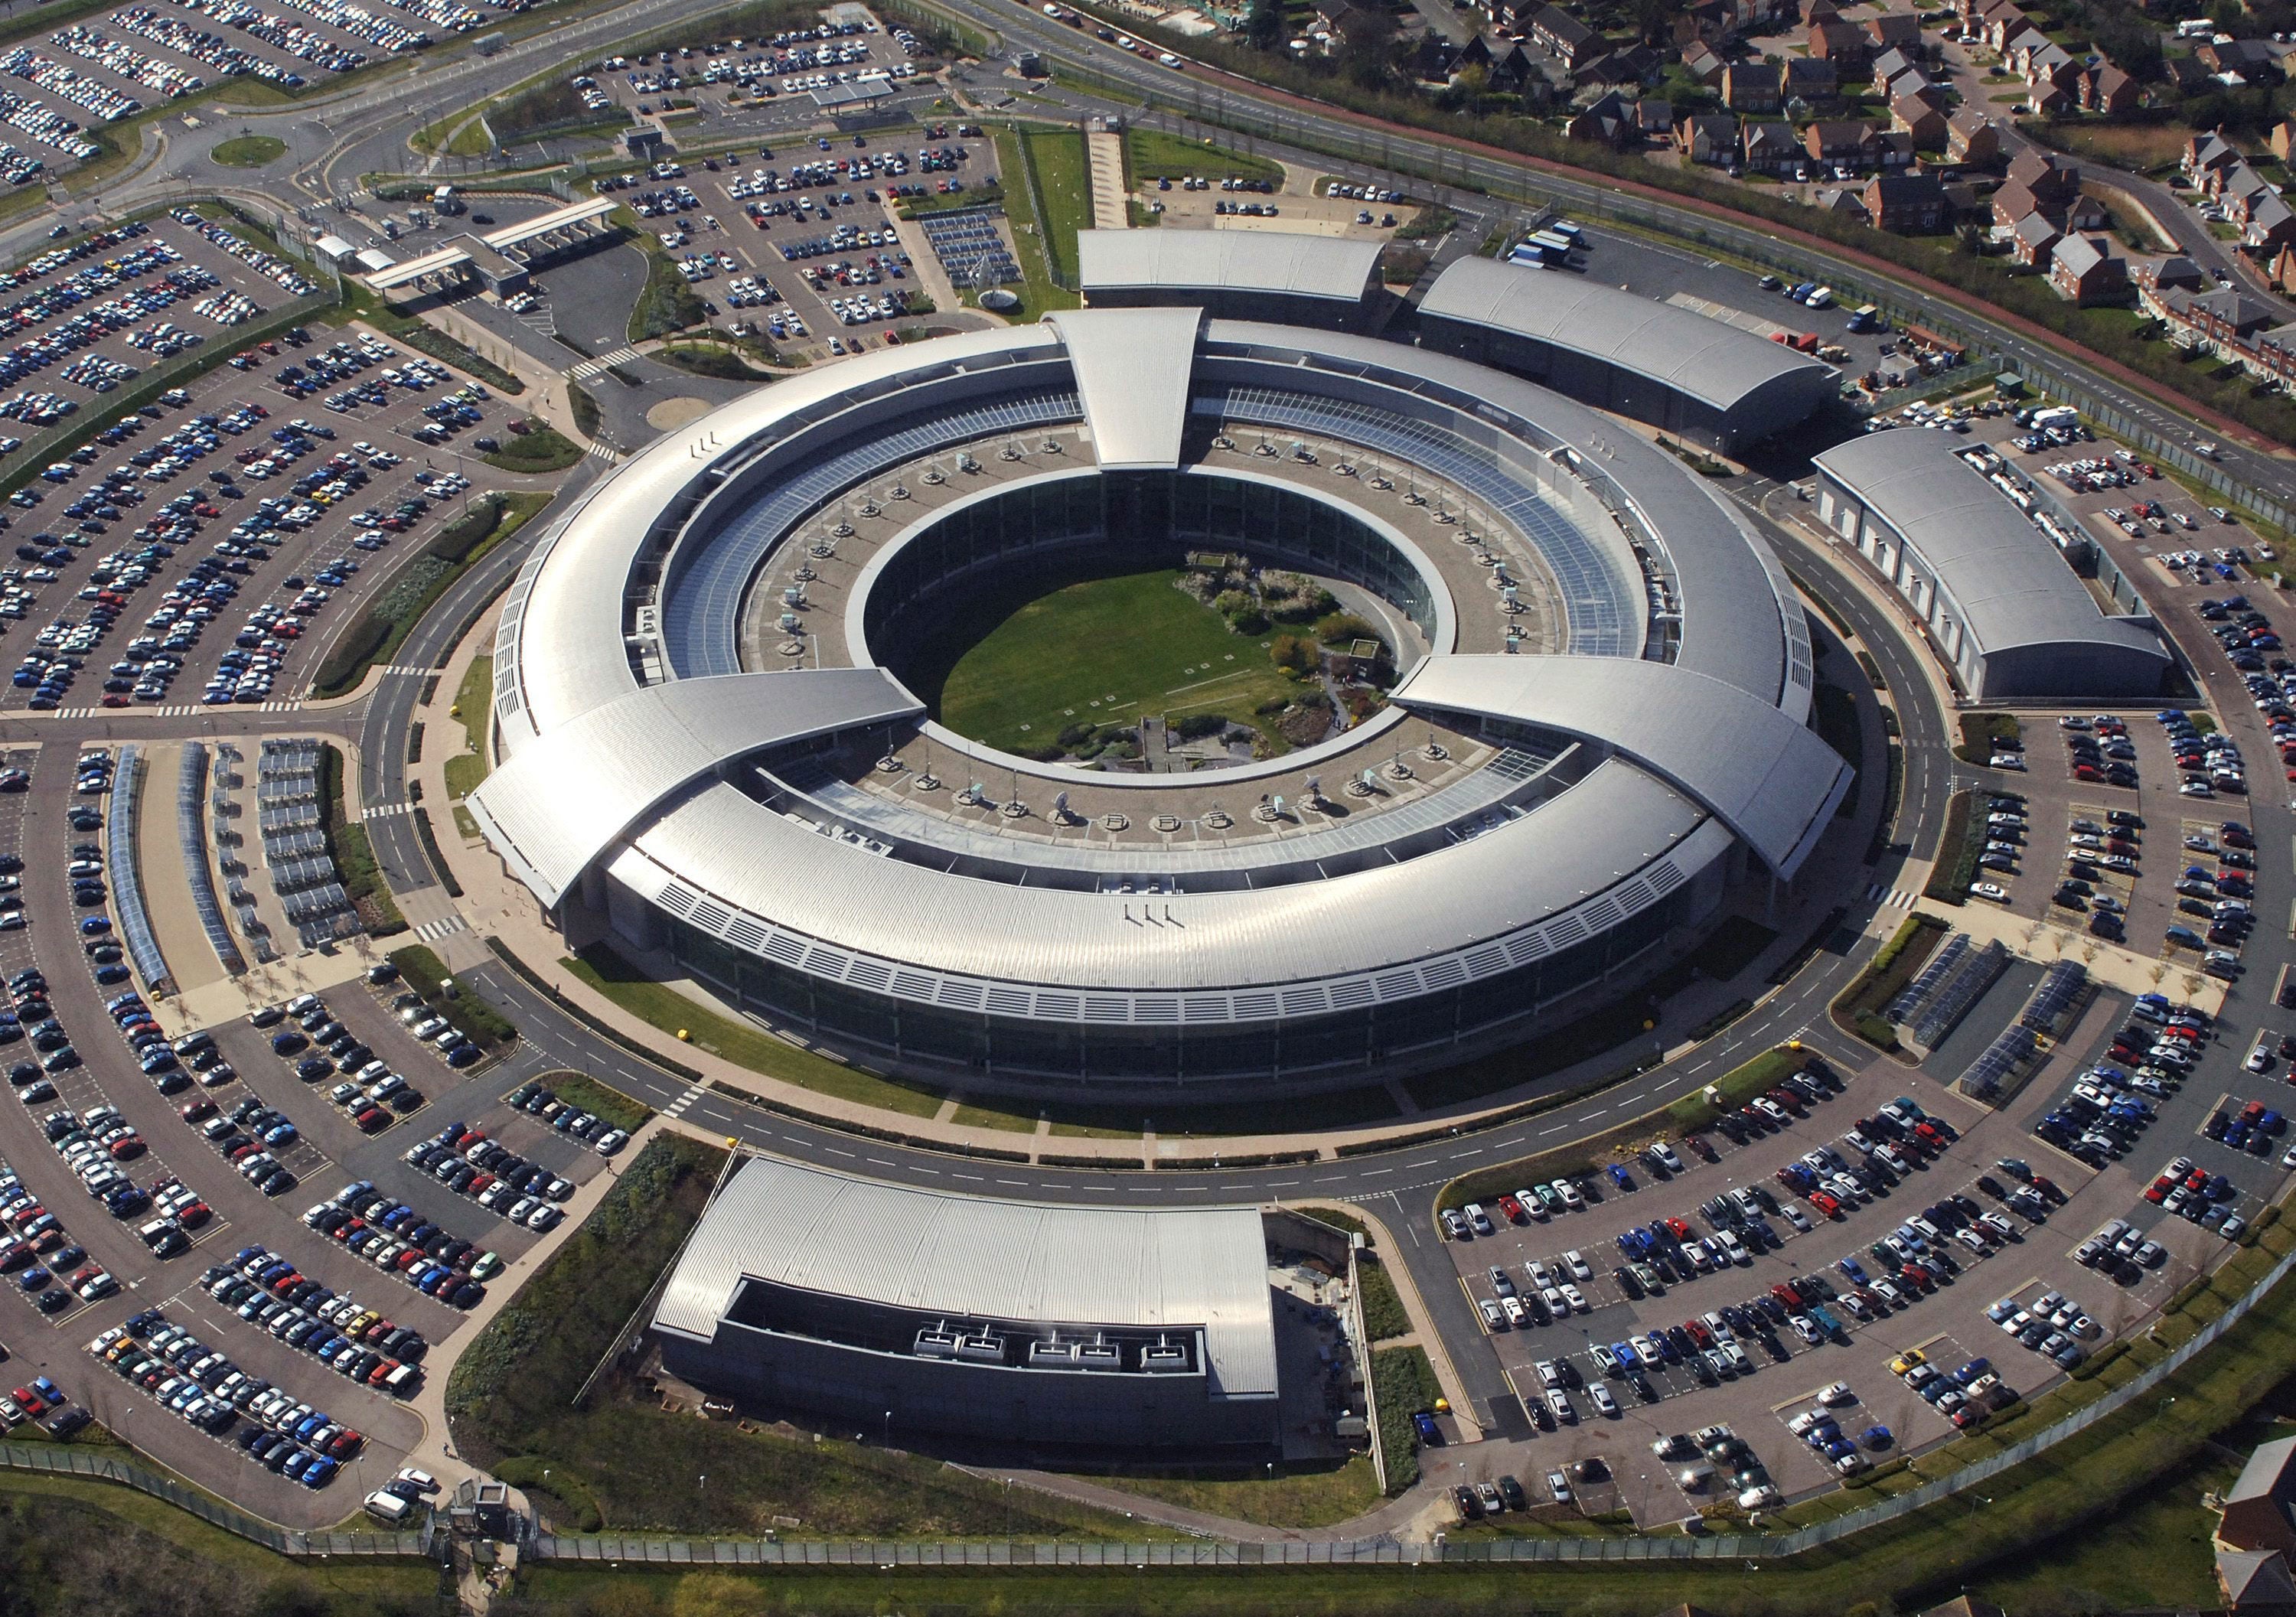 According to the Guardian newspaper, the payments were made in order to secure access to Britain's intelligence gathering programmes.